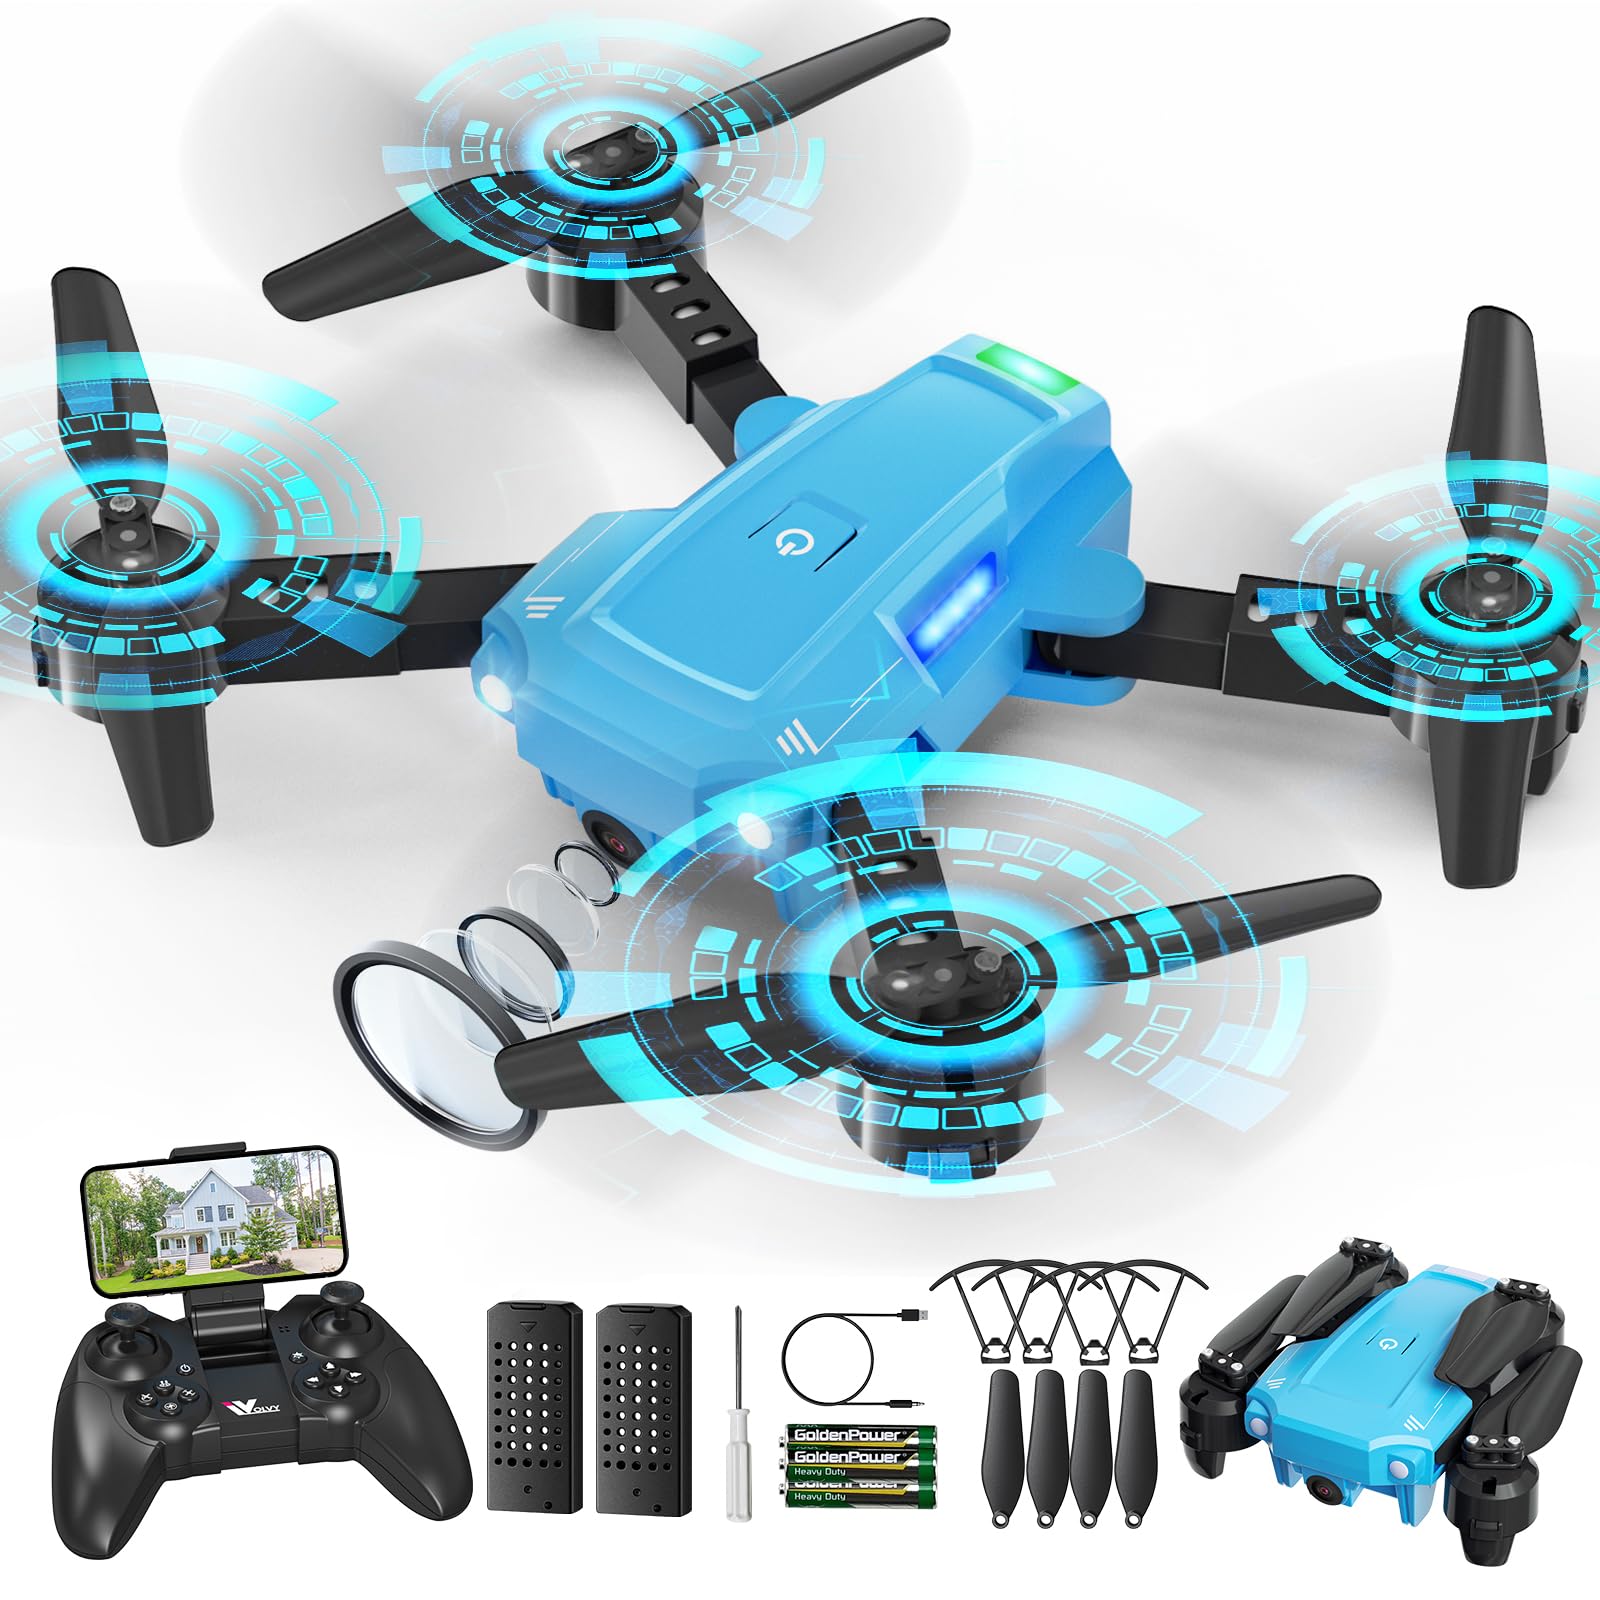 ATTOP Mini Drone for Kids with 1080P Camera – Foldable FPV Drone for Kids, Pocket RC Quadcopter with 2 Batteries, One Key Start, Altitude Hold, Headless Mode, 3D Flips, Toys Gifts for Boys Girls